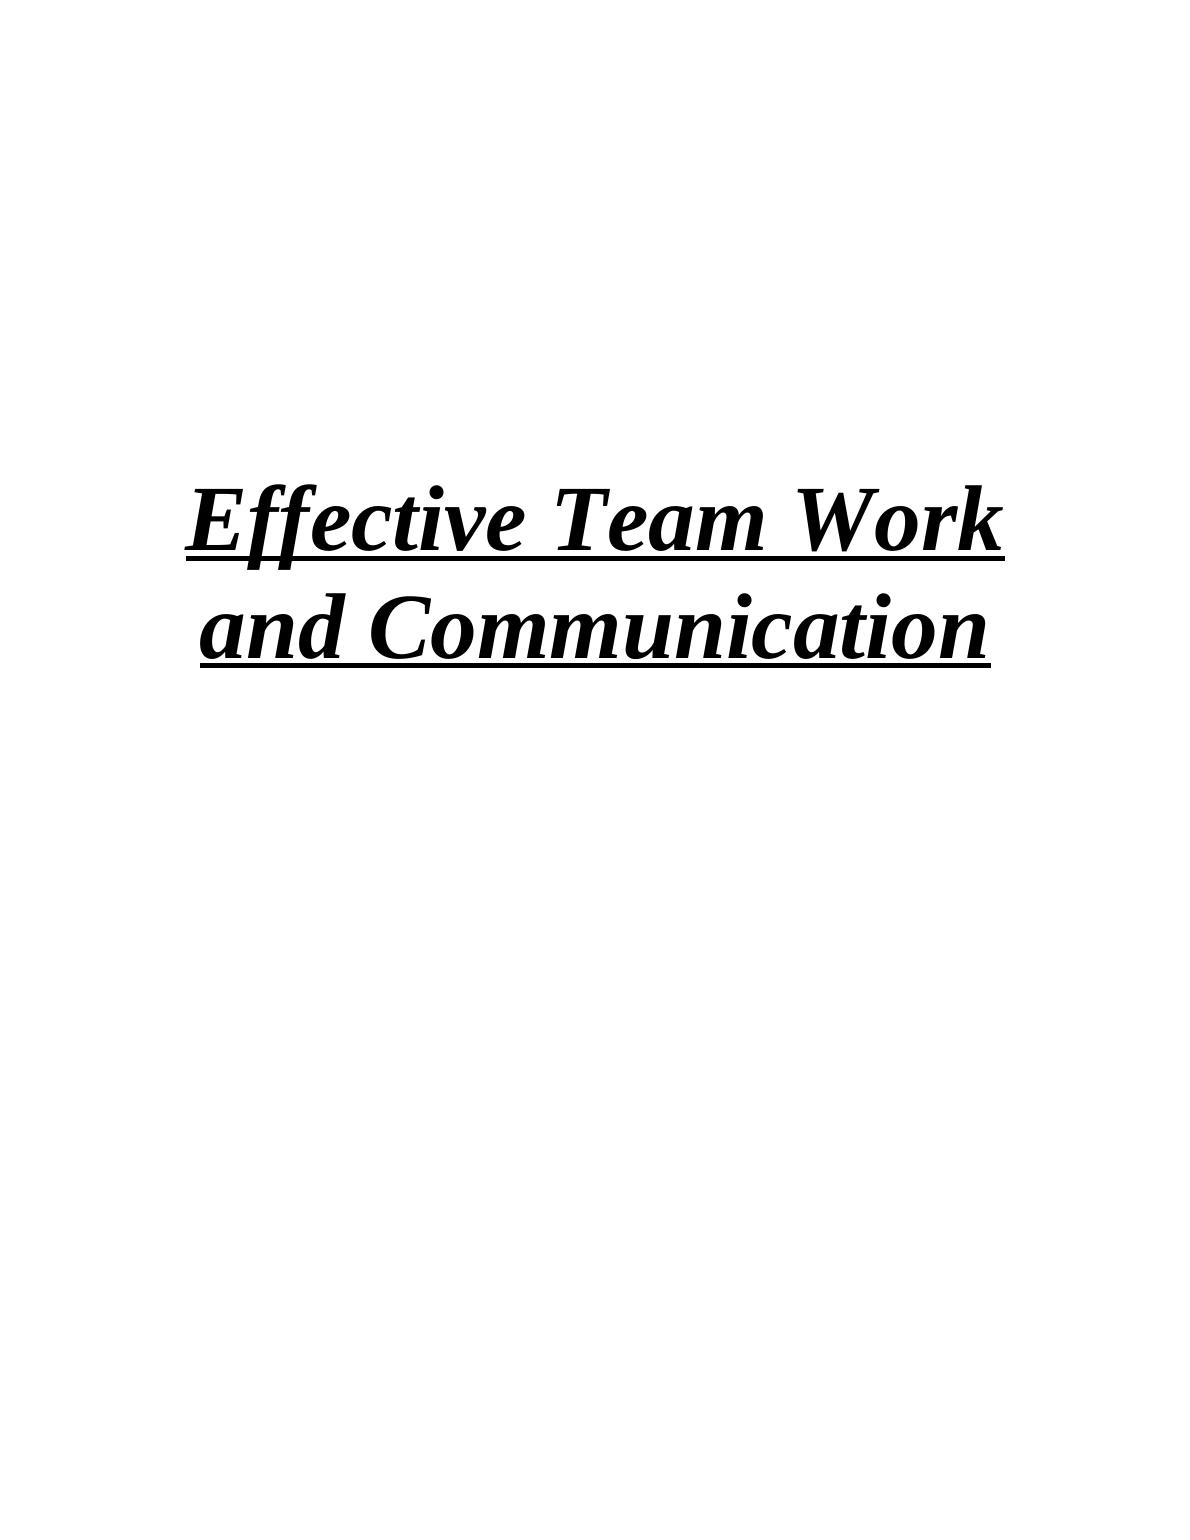 Effective Team Work and Communication_1